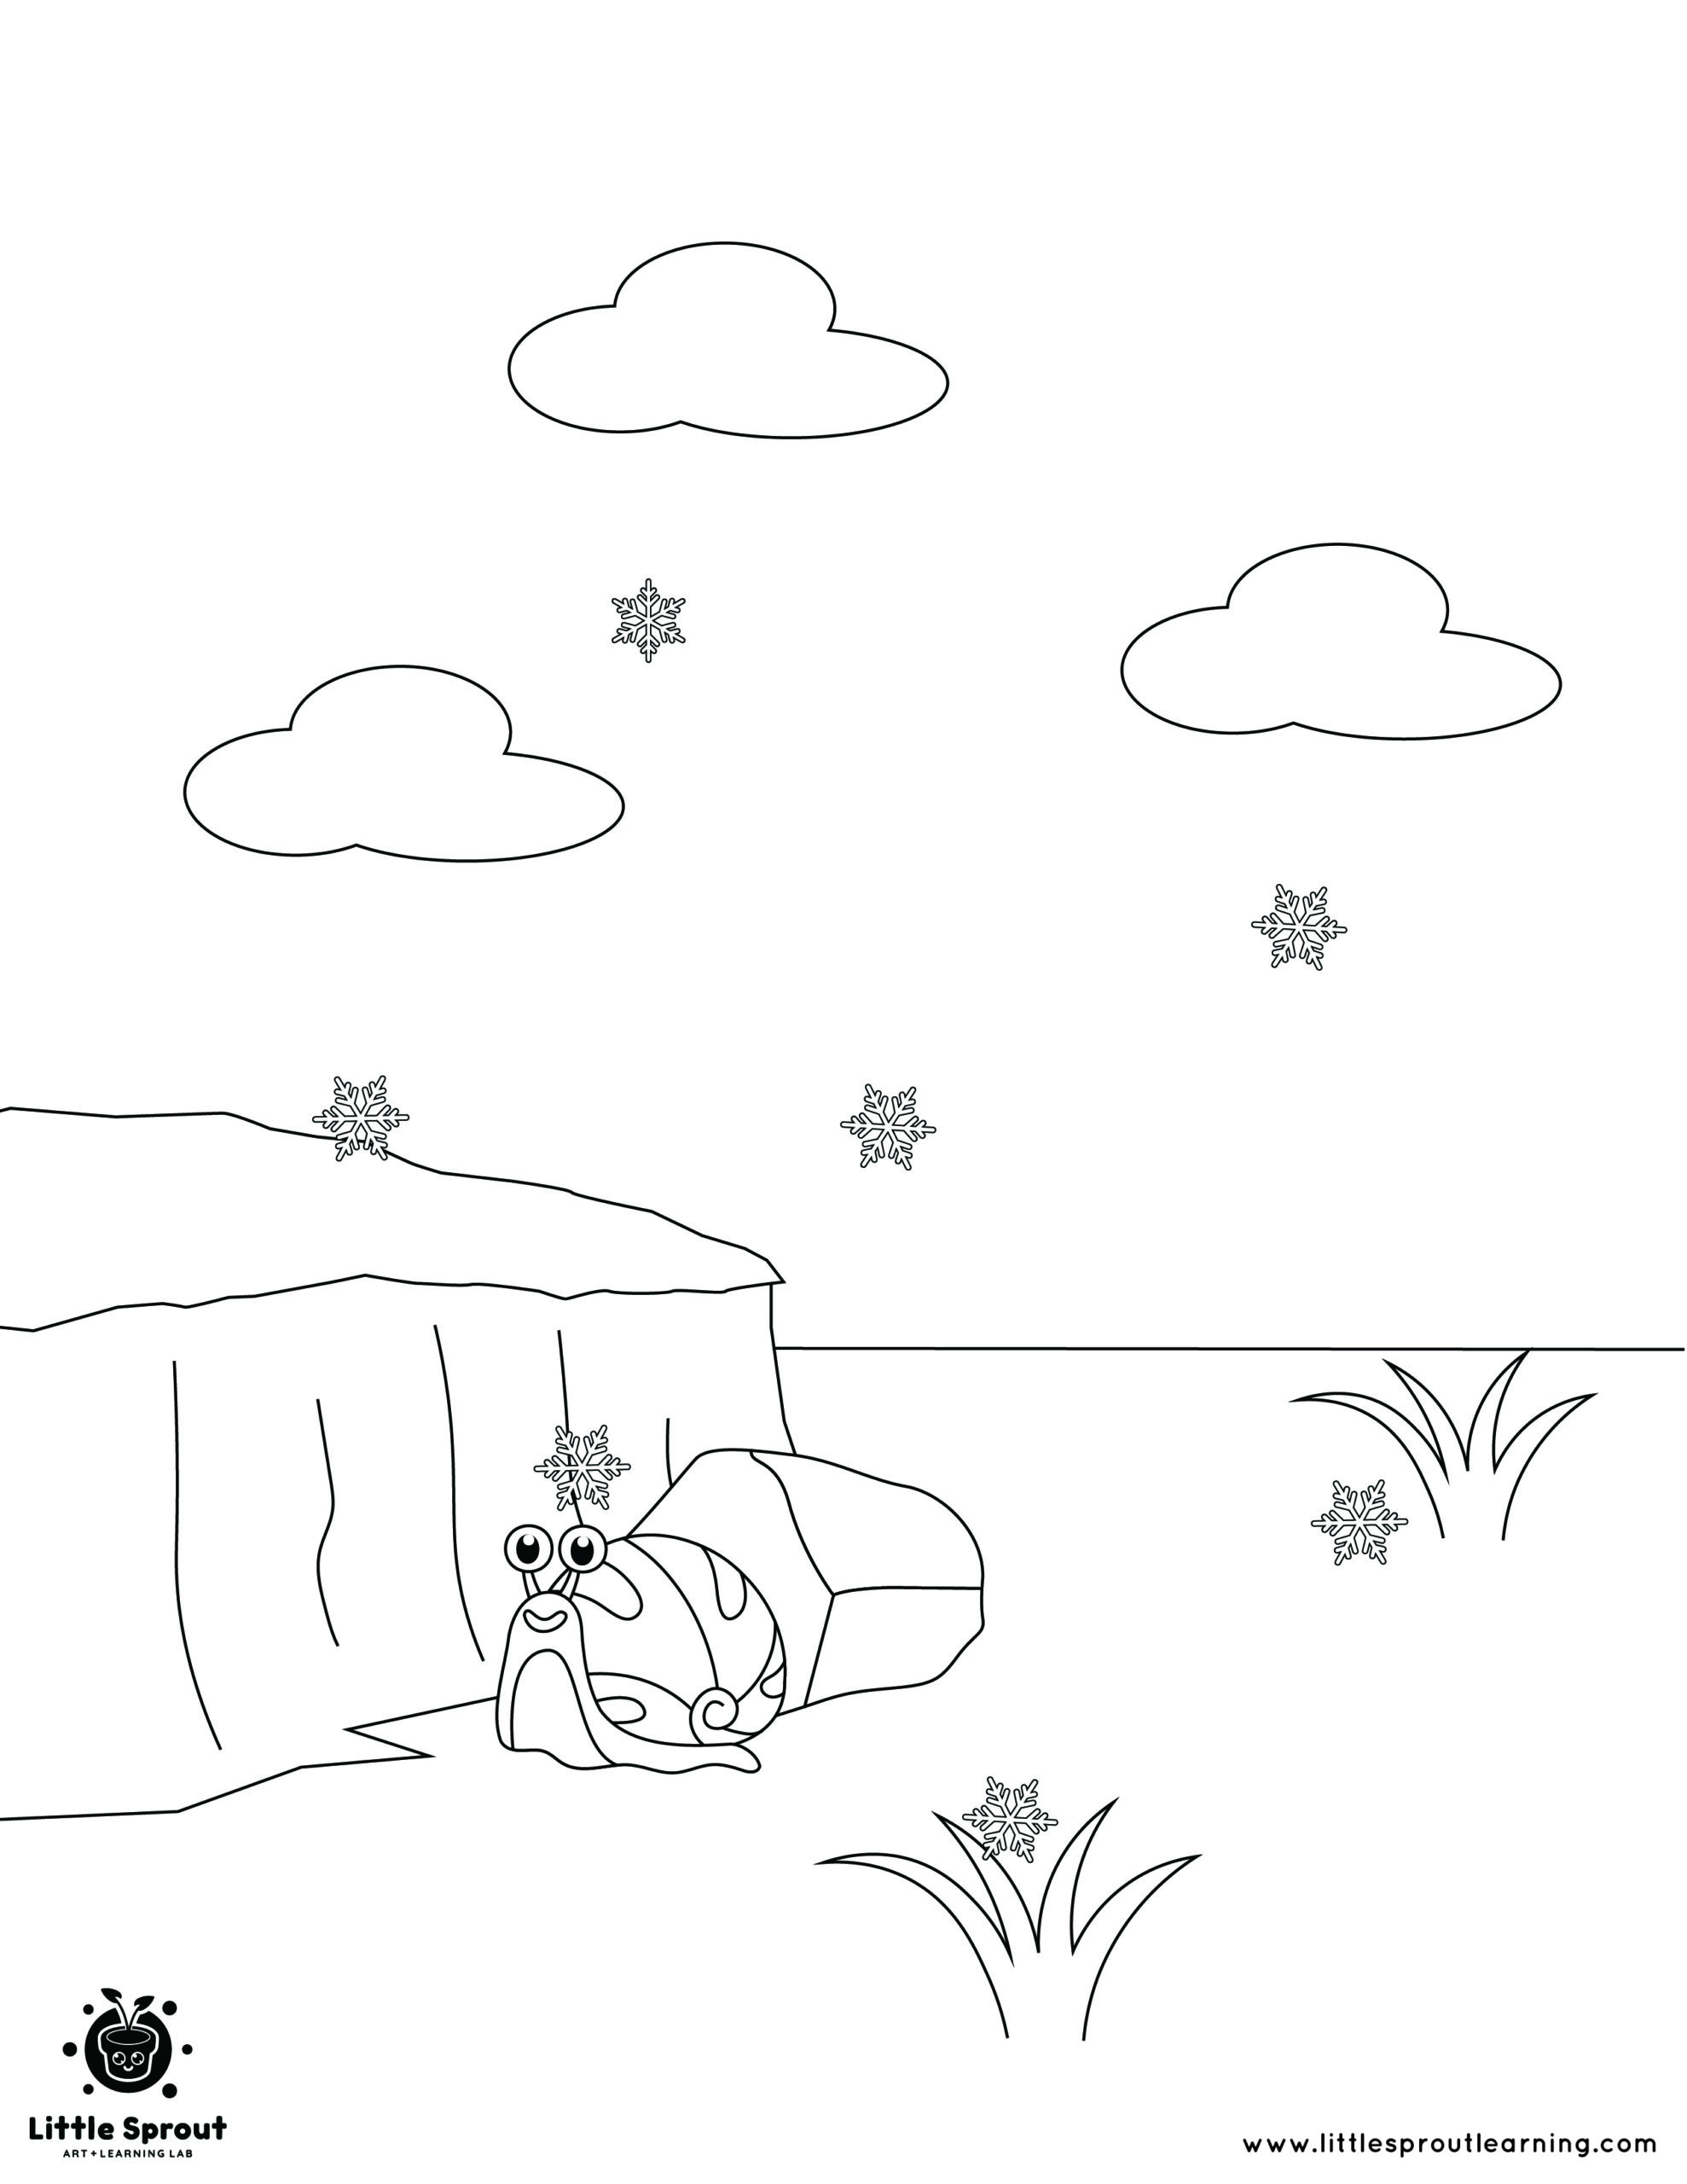 A Snail and its Rock – Hibernating Animals Coloring Page